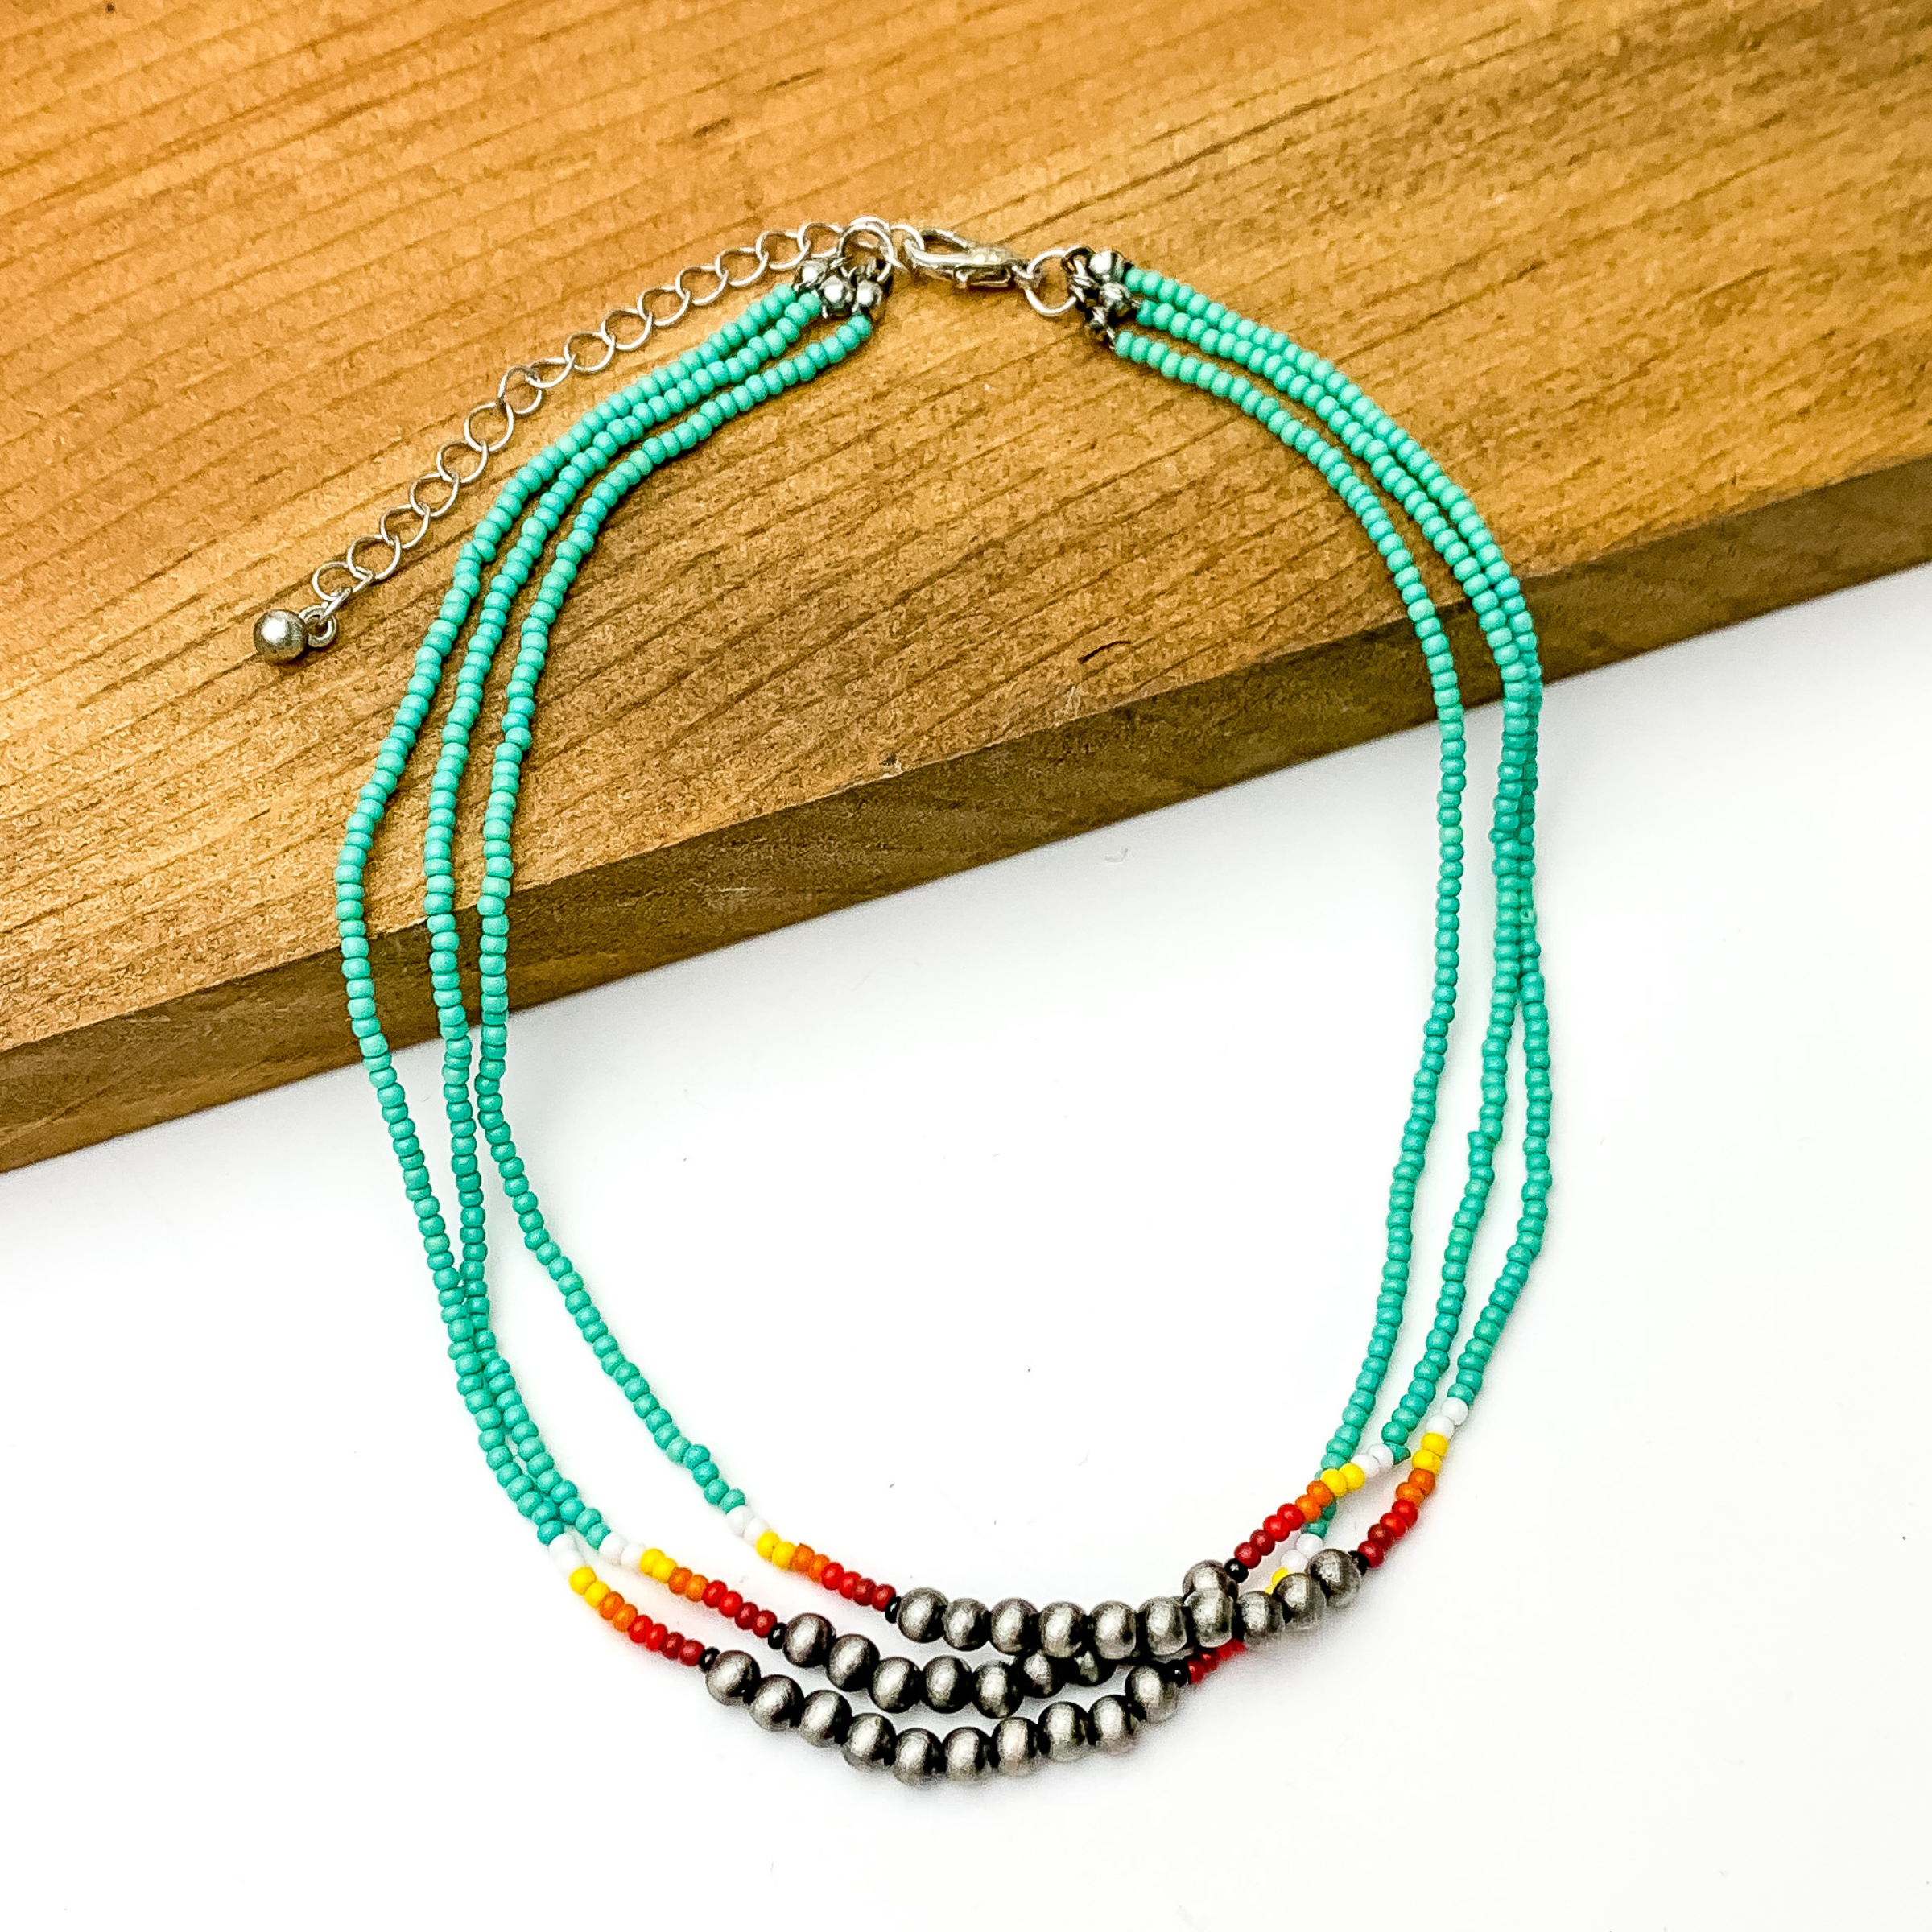 Three stranded necklace with mostly turquoise beads. This necklace also includes a segment of silver beads on each strand with a couple white, red, and orange beads on each side of the segment. This necklace is pictured partially on a block of wood on a white background.  